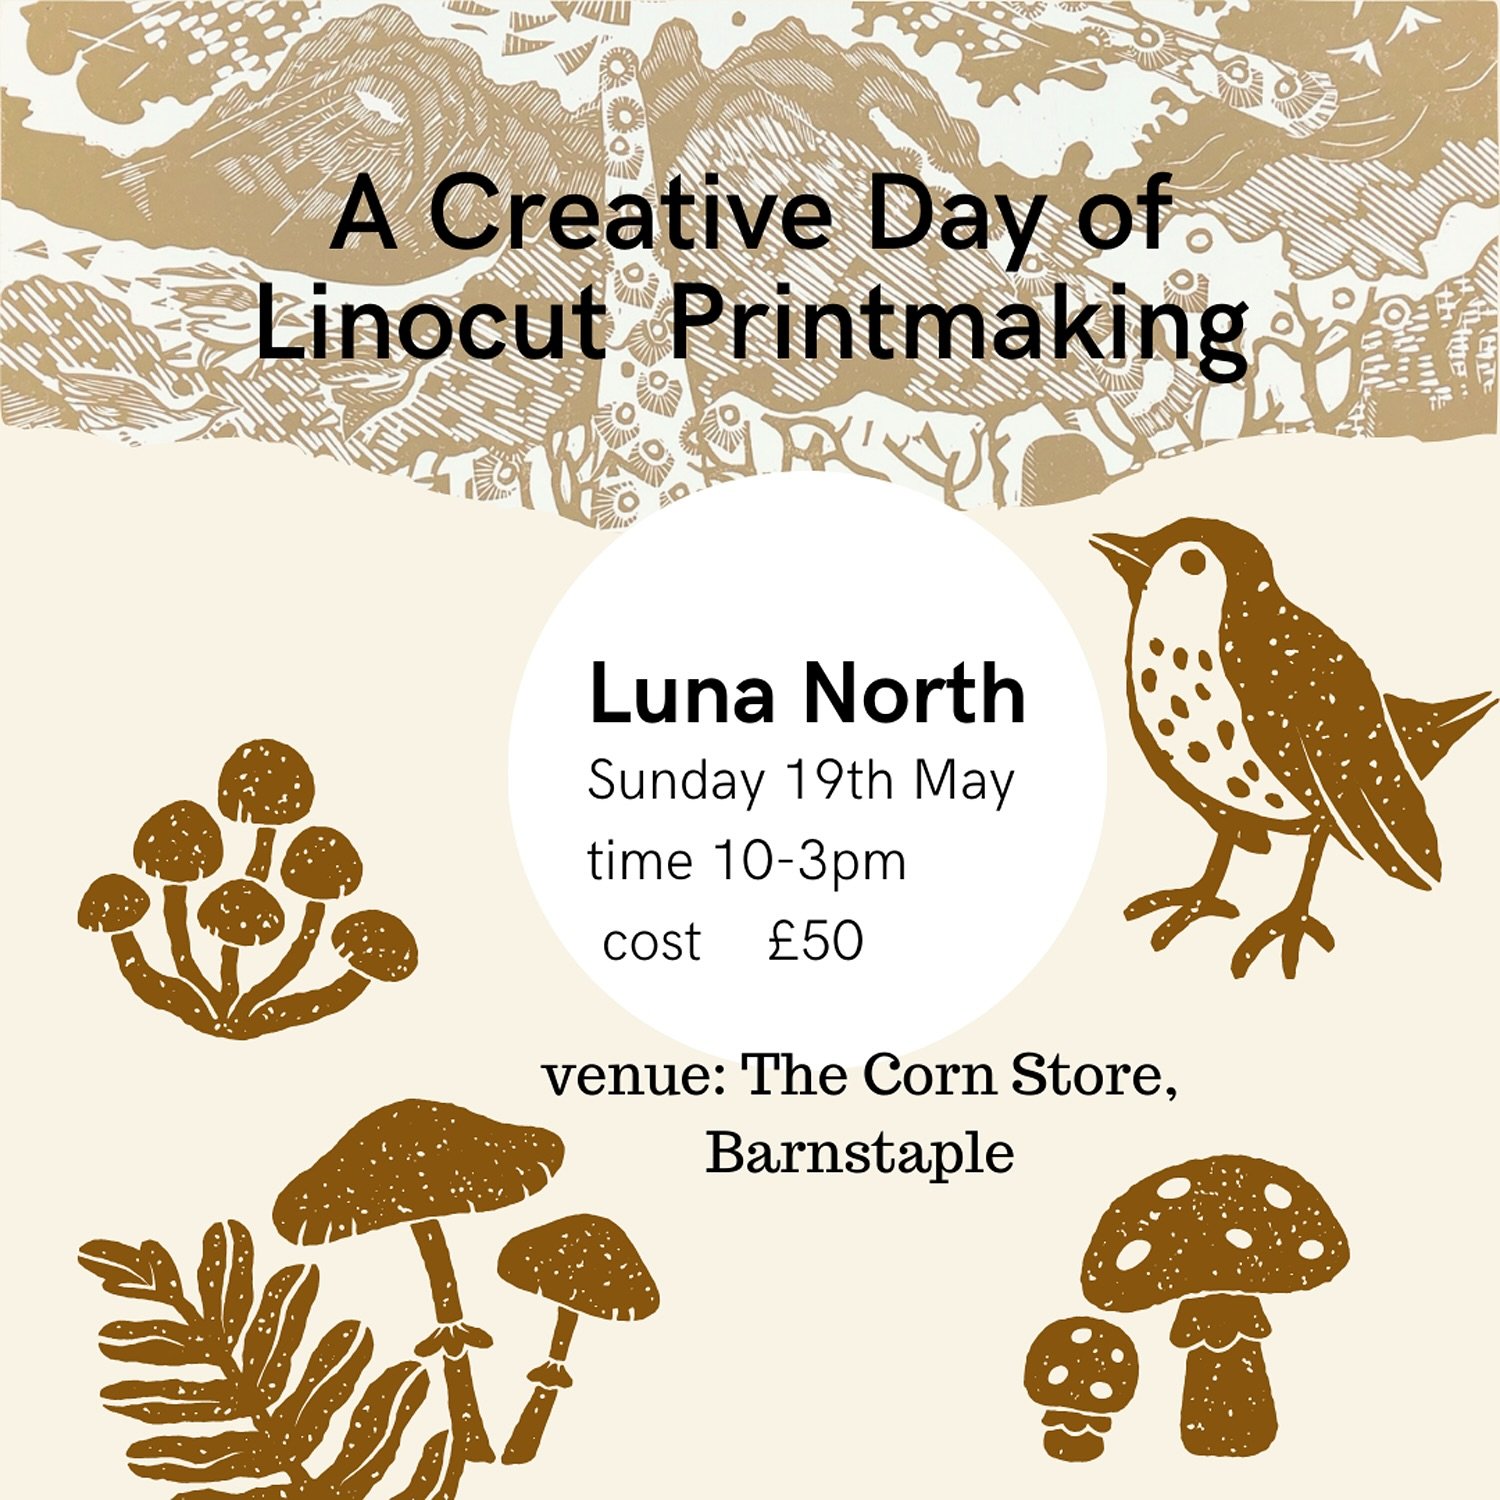 If you have been thinking you might like to learn linocut printmaking with me, here is my next workshop. 
Go to @studio.kind in the event page to book☝️

#devonartist #printmaking #linocut #lunanorthartist #craft #artworkshop